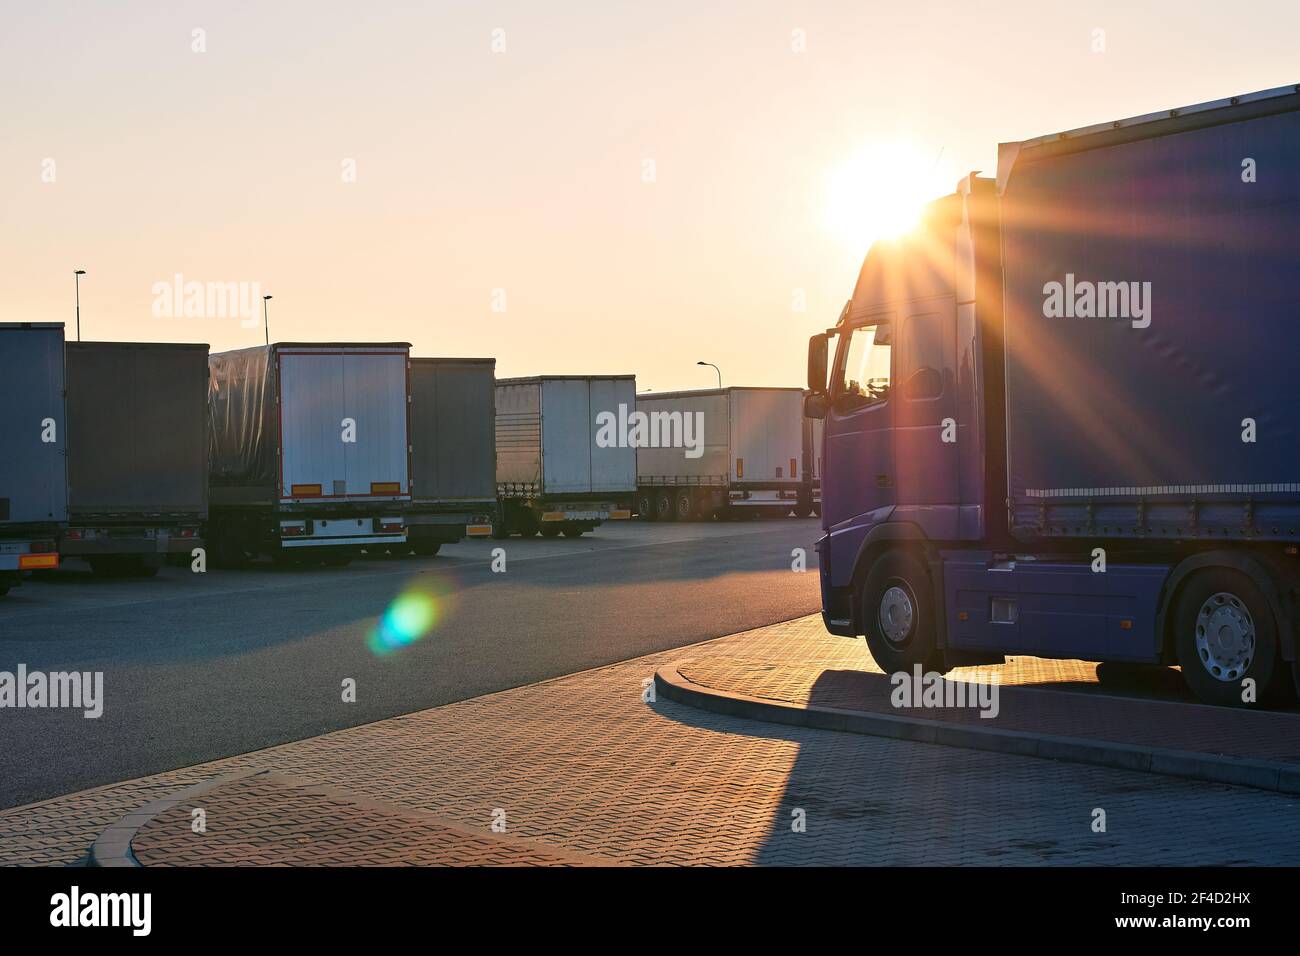 Loaded trucks parked in waiting area on border crossing. Evening view of International hard transportation and logistics with lens flare. Stock Photo